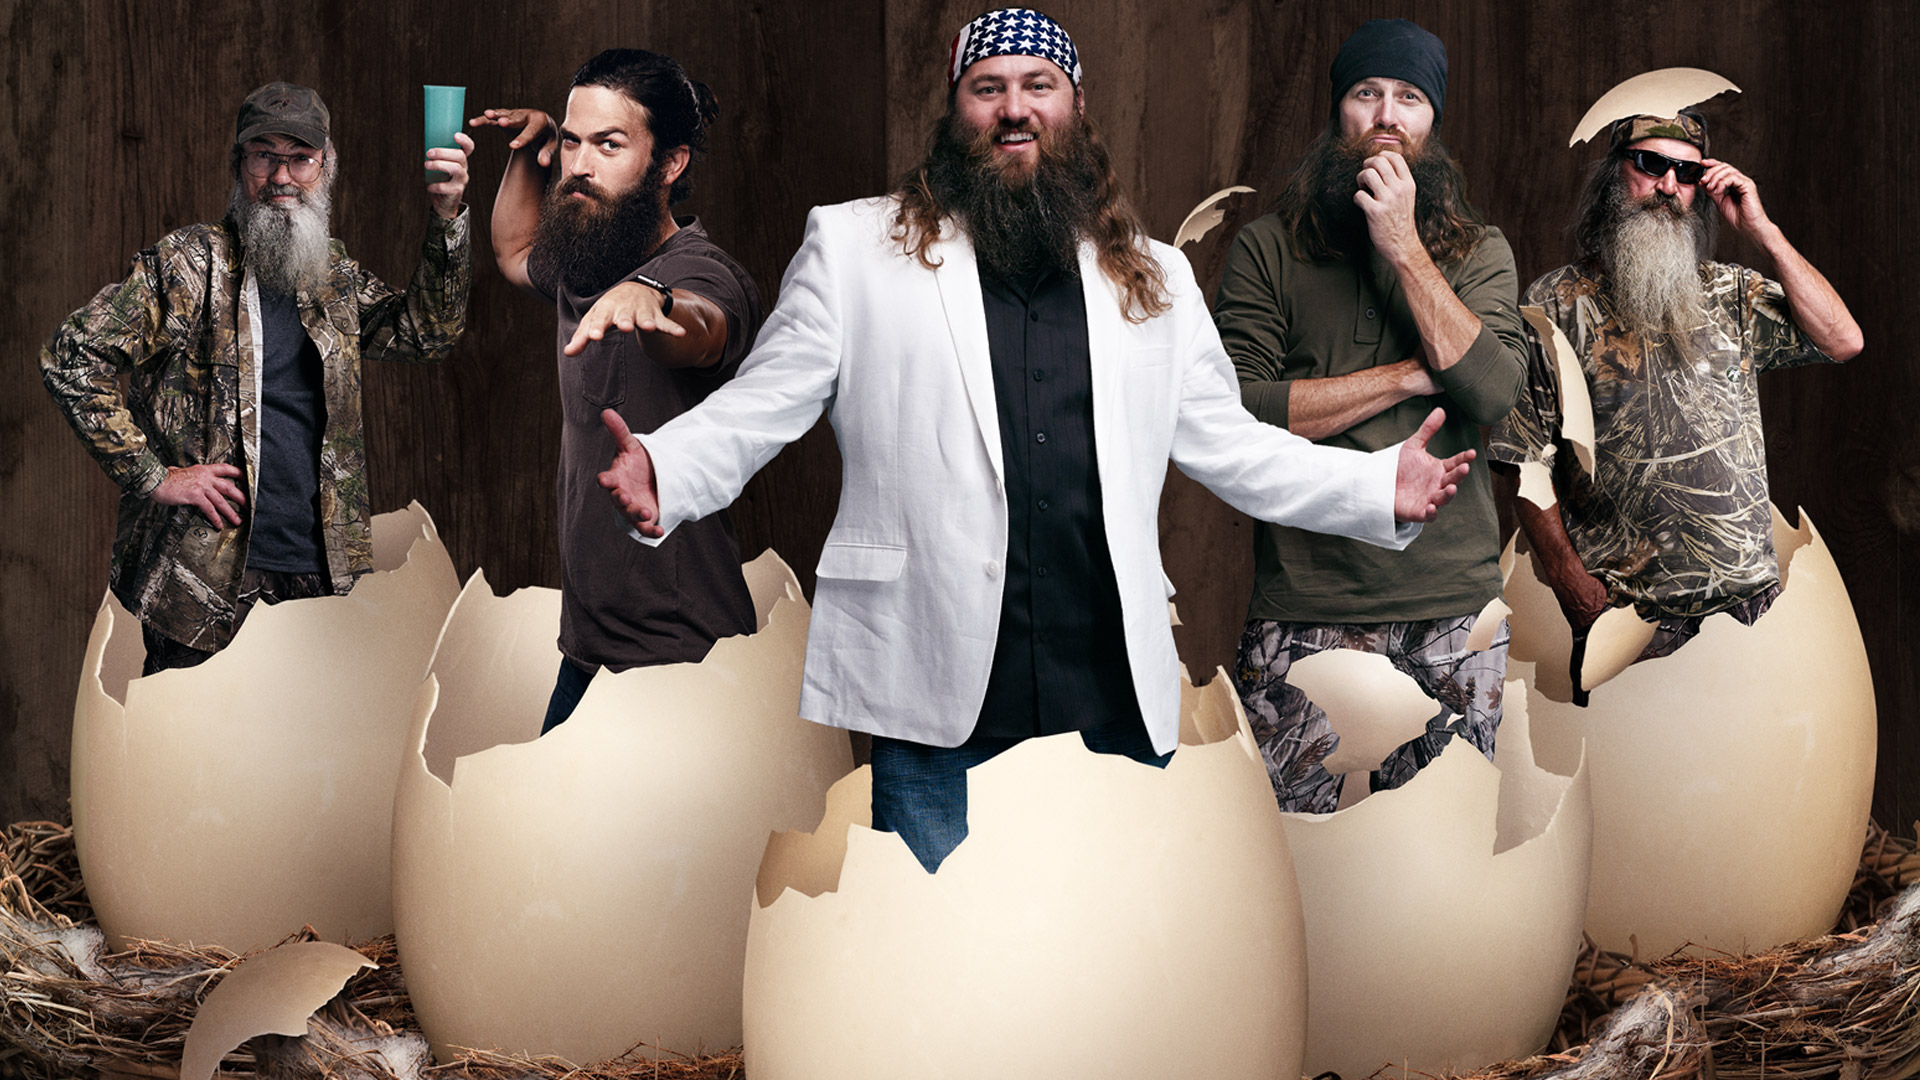 Catch up on season 11 of Duck Dynasty, only on A&E. Get exclusive video...